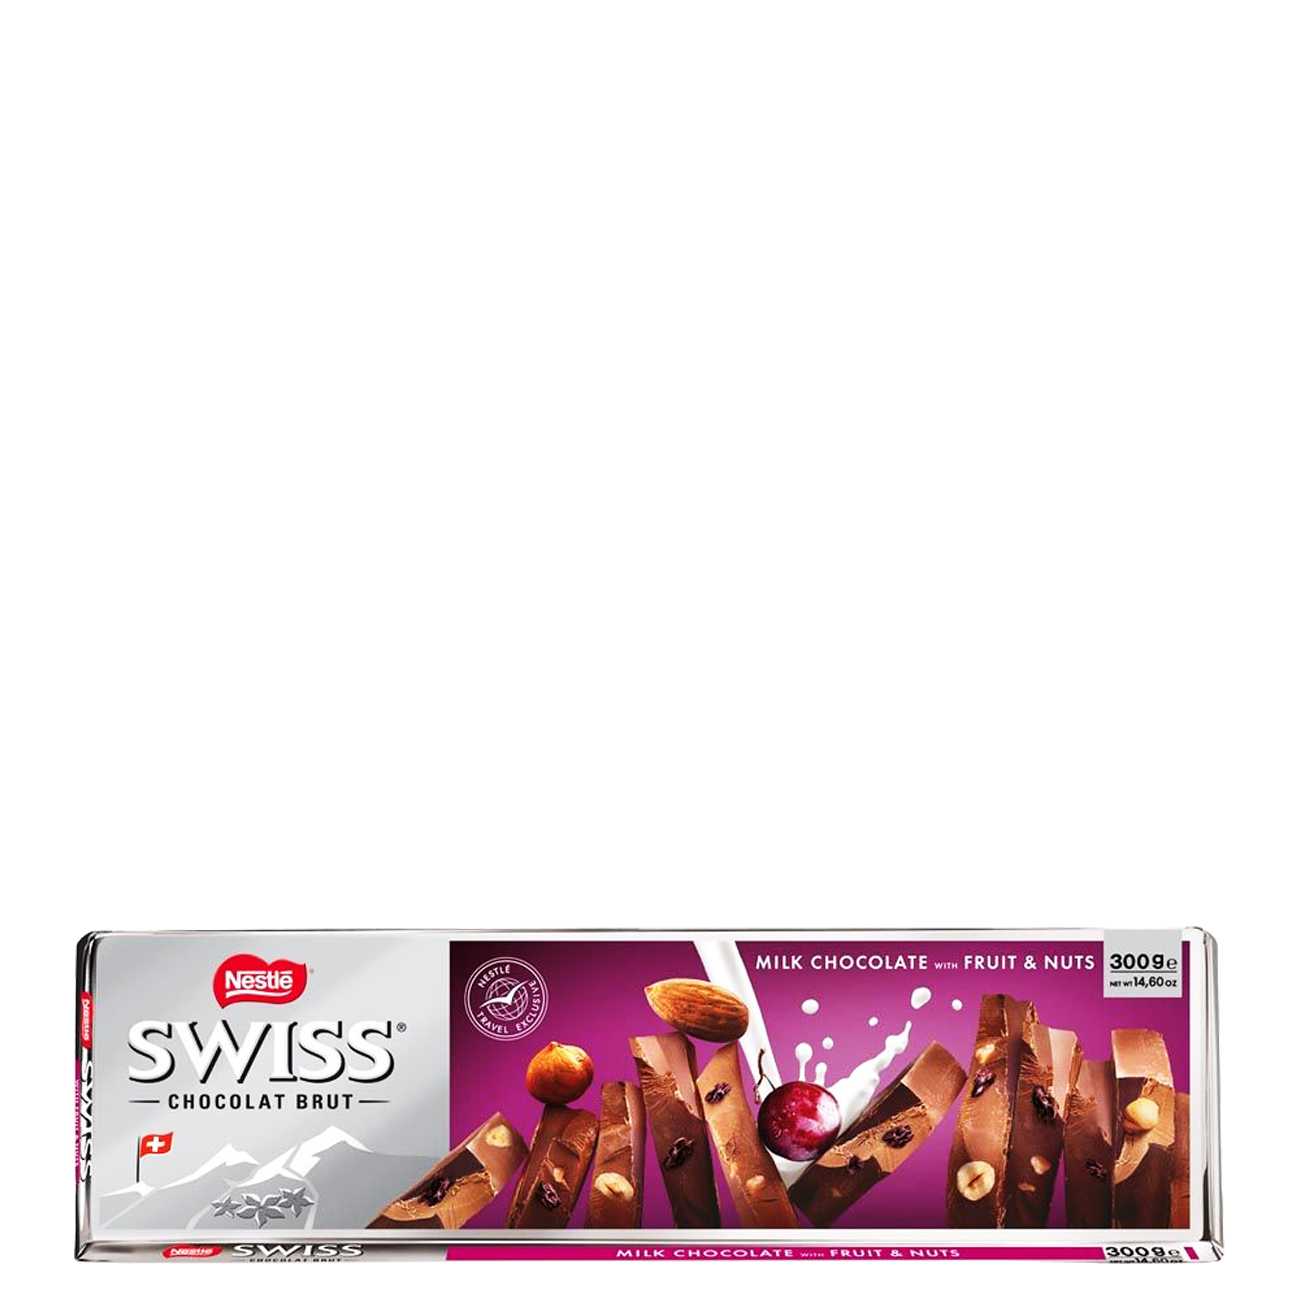 MILK CHOCOLATE WITH FRUIT & NUTS 300 G